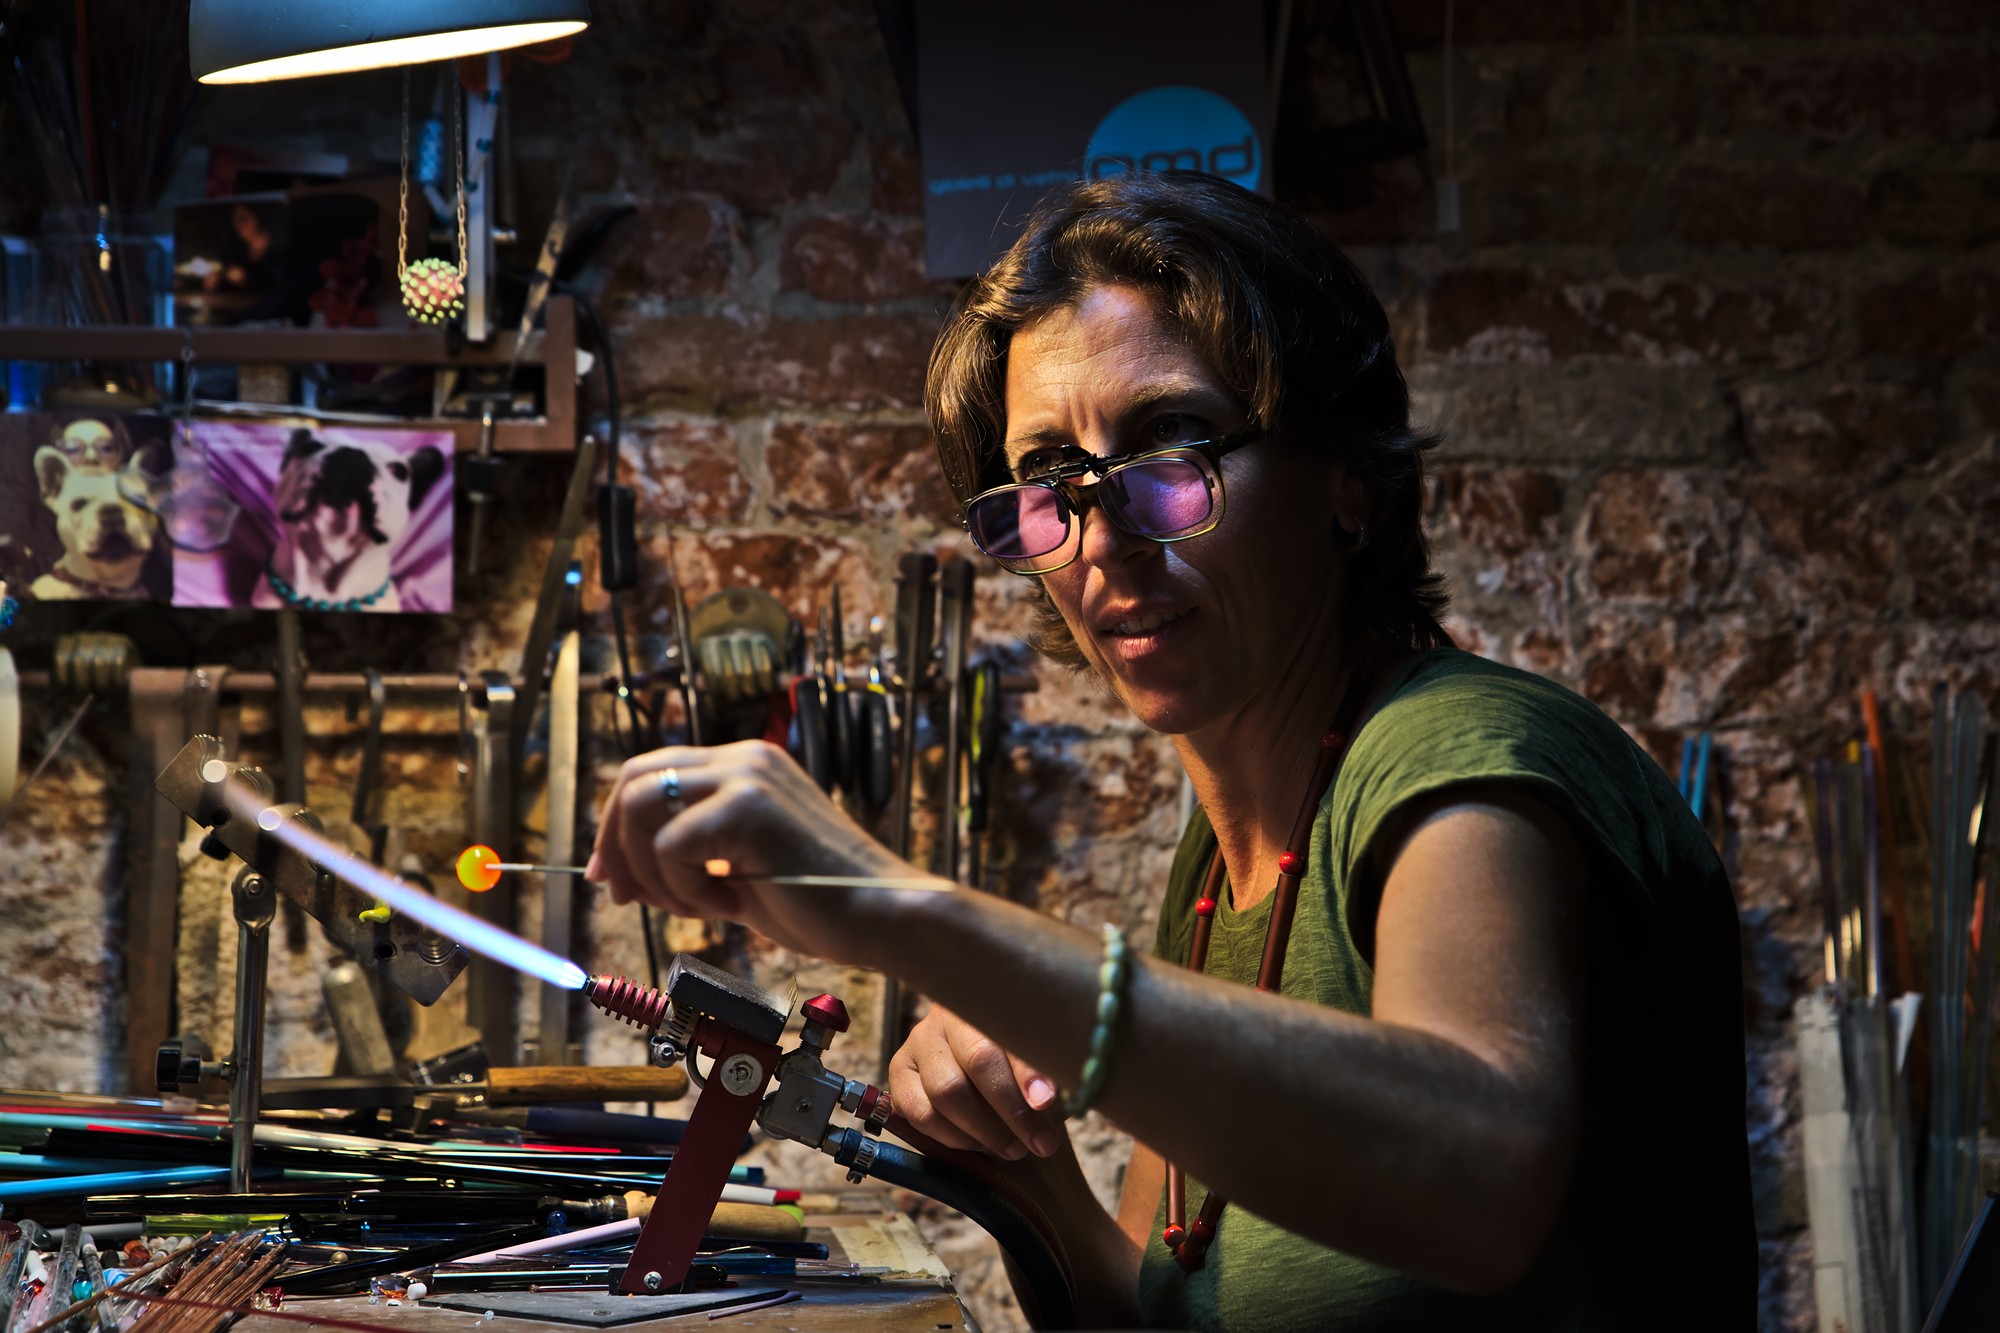 Simo Iacovvizi makes Venetian glass beads by hand in her workshop close to Campo San Barnaba in Venice